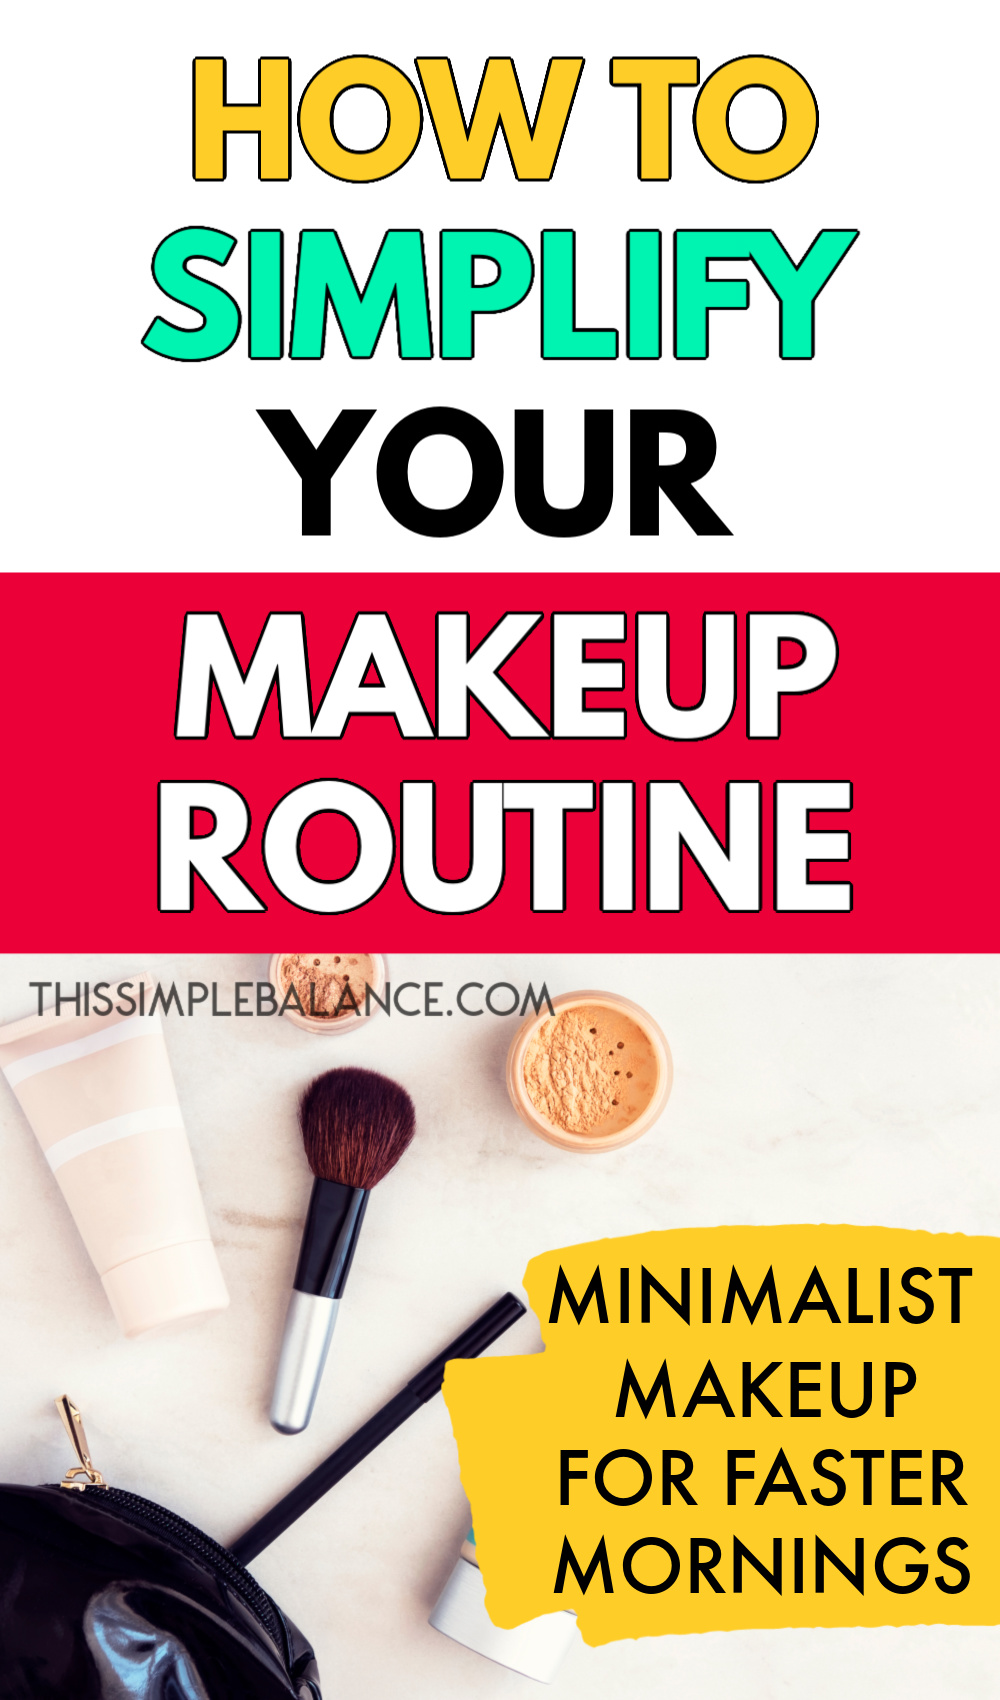 makeup on counter with minimalist makeup bag, with text overlay, "how to simplify your makeup routine - minimalist makeup for faster mornings"